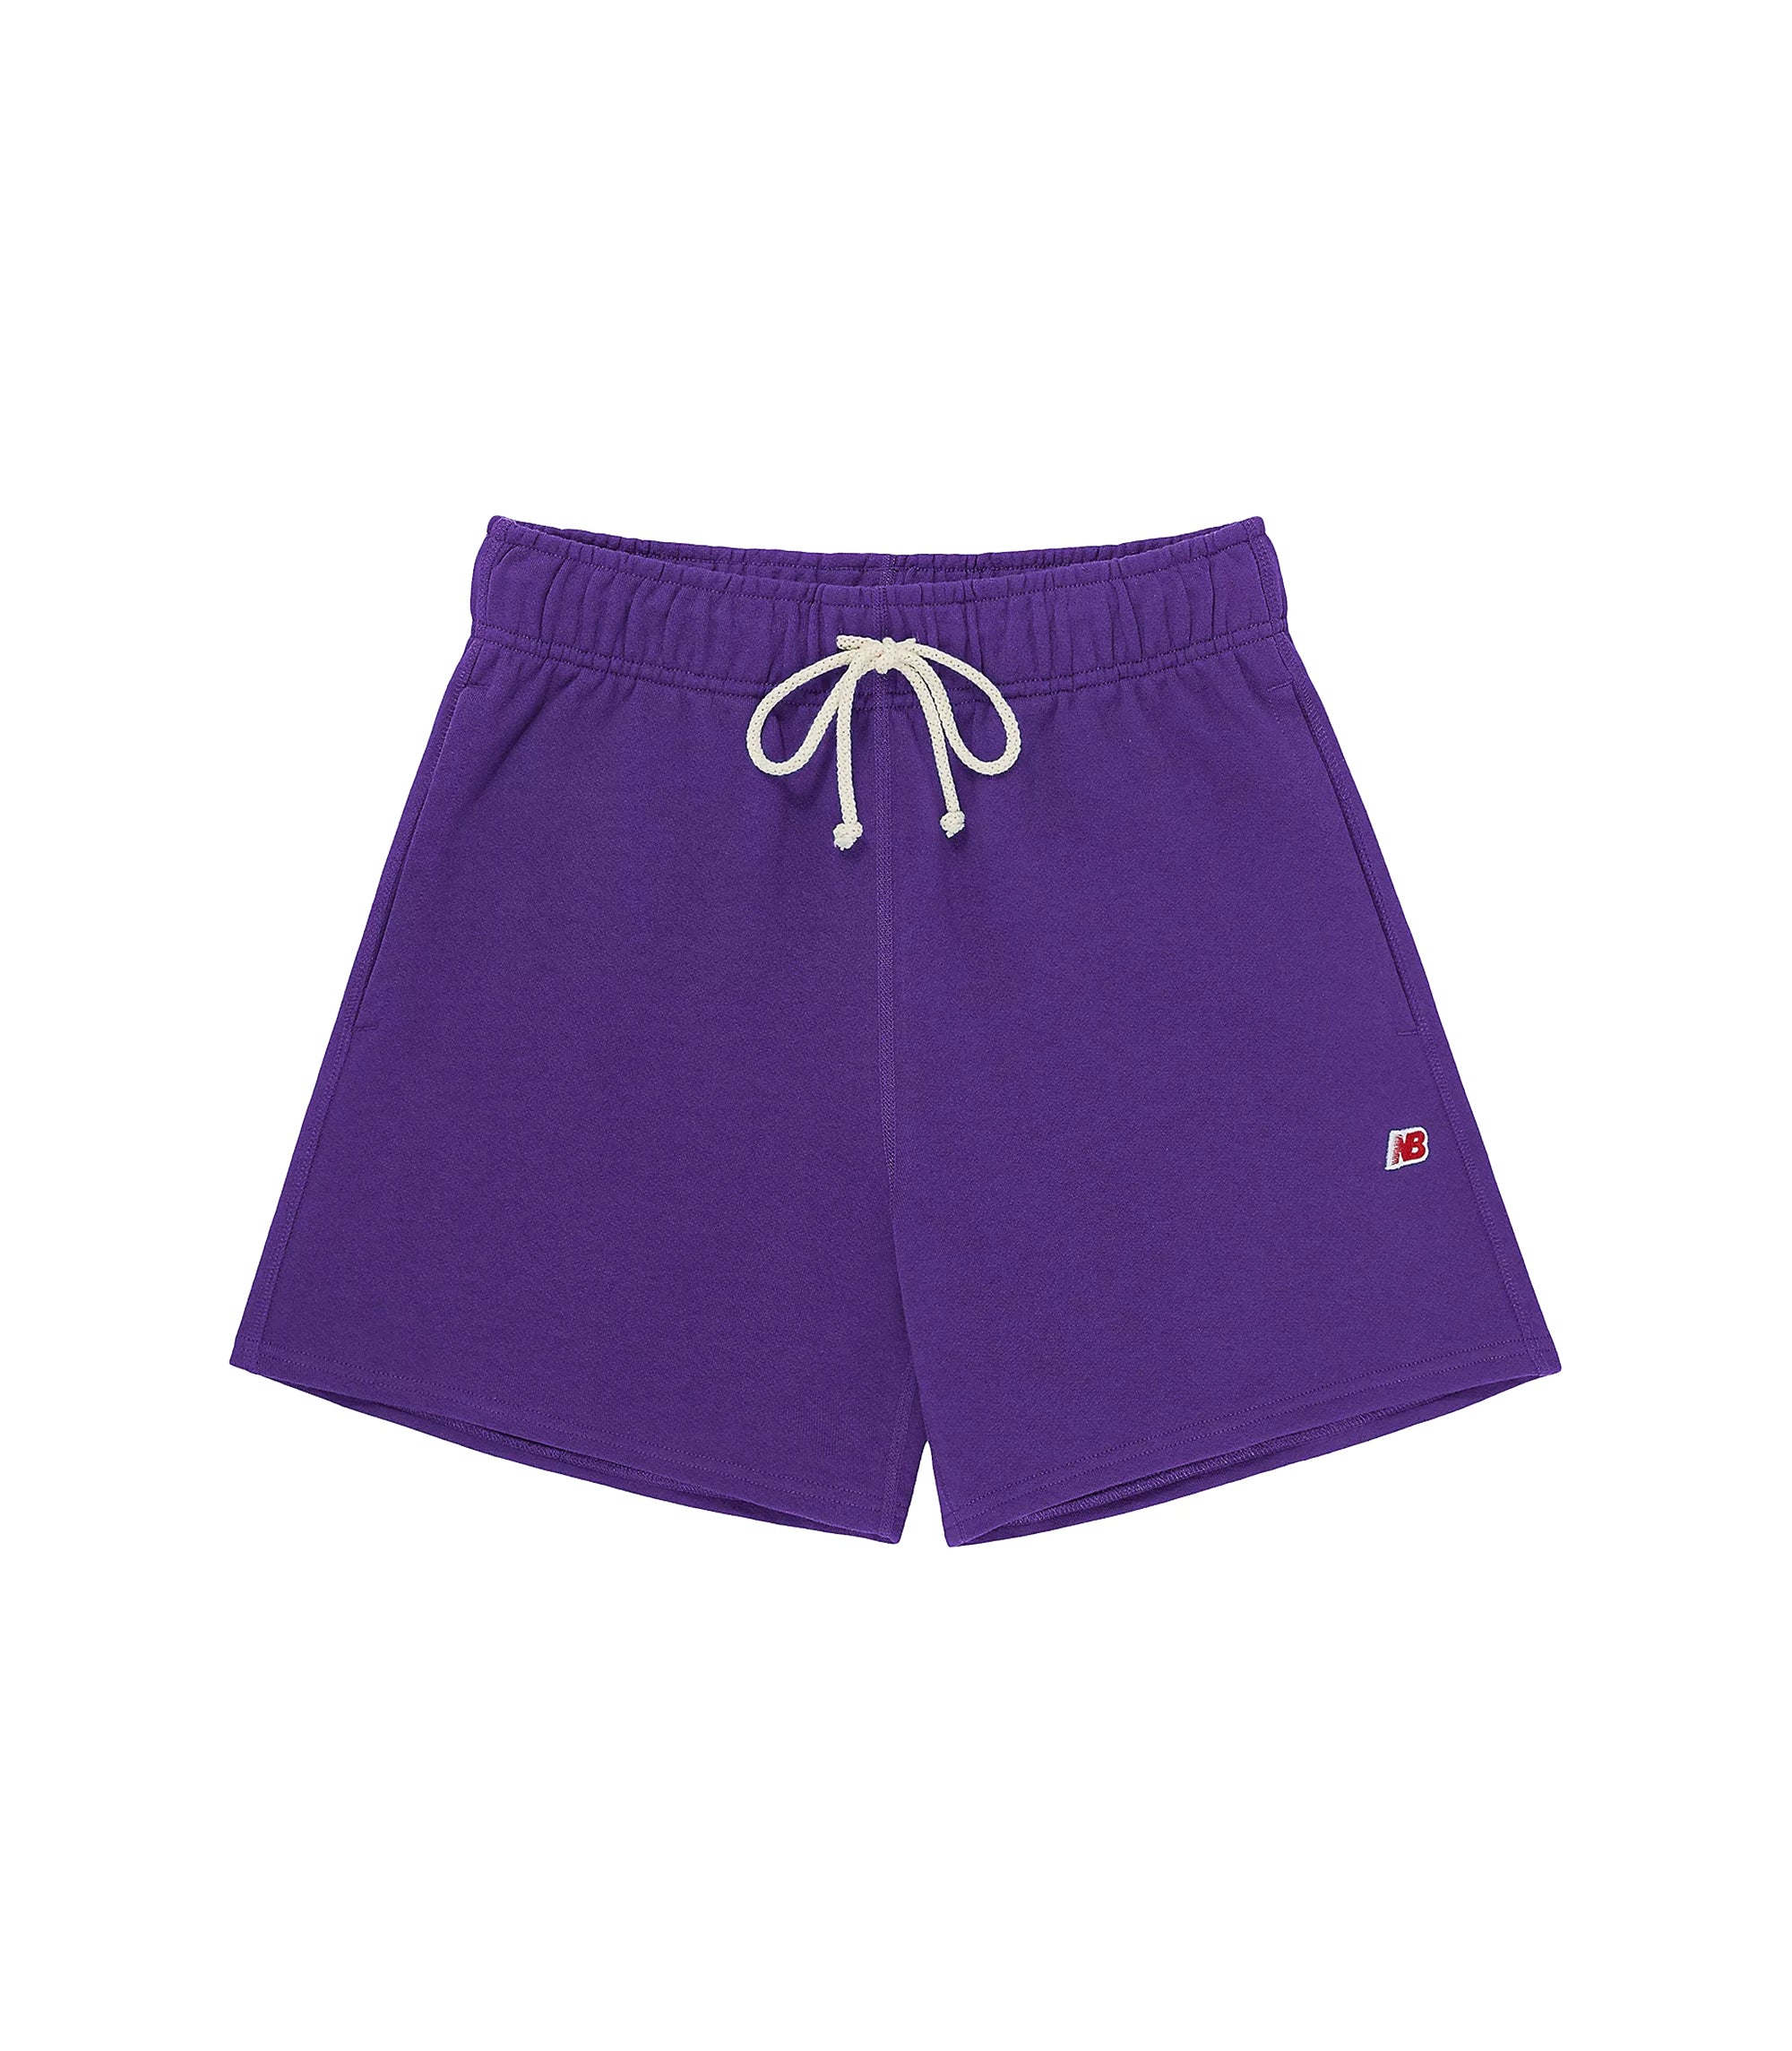 Made in USA Shorts - Prism Purple